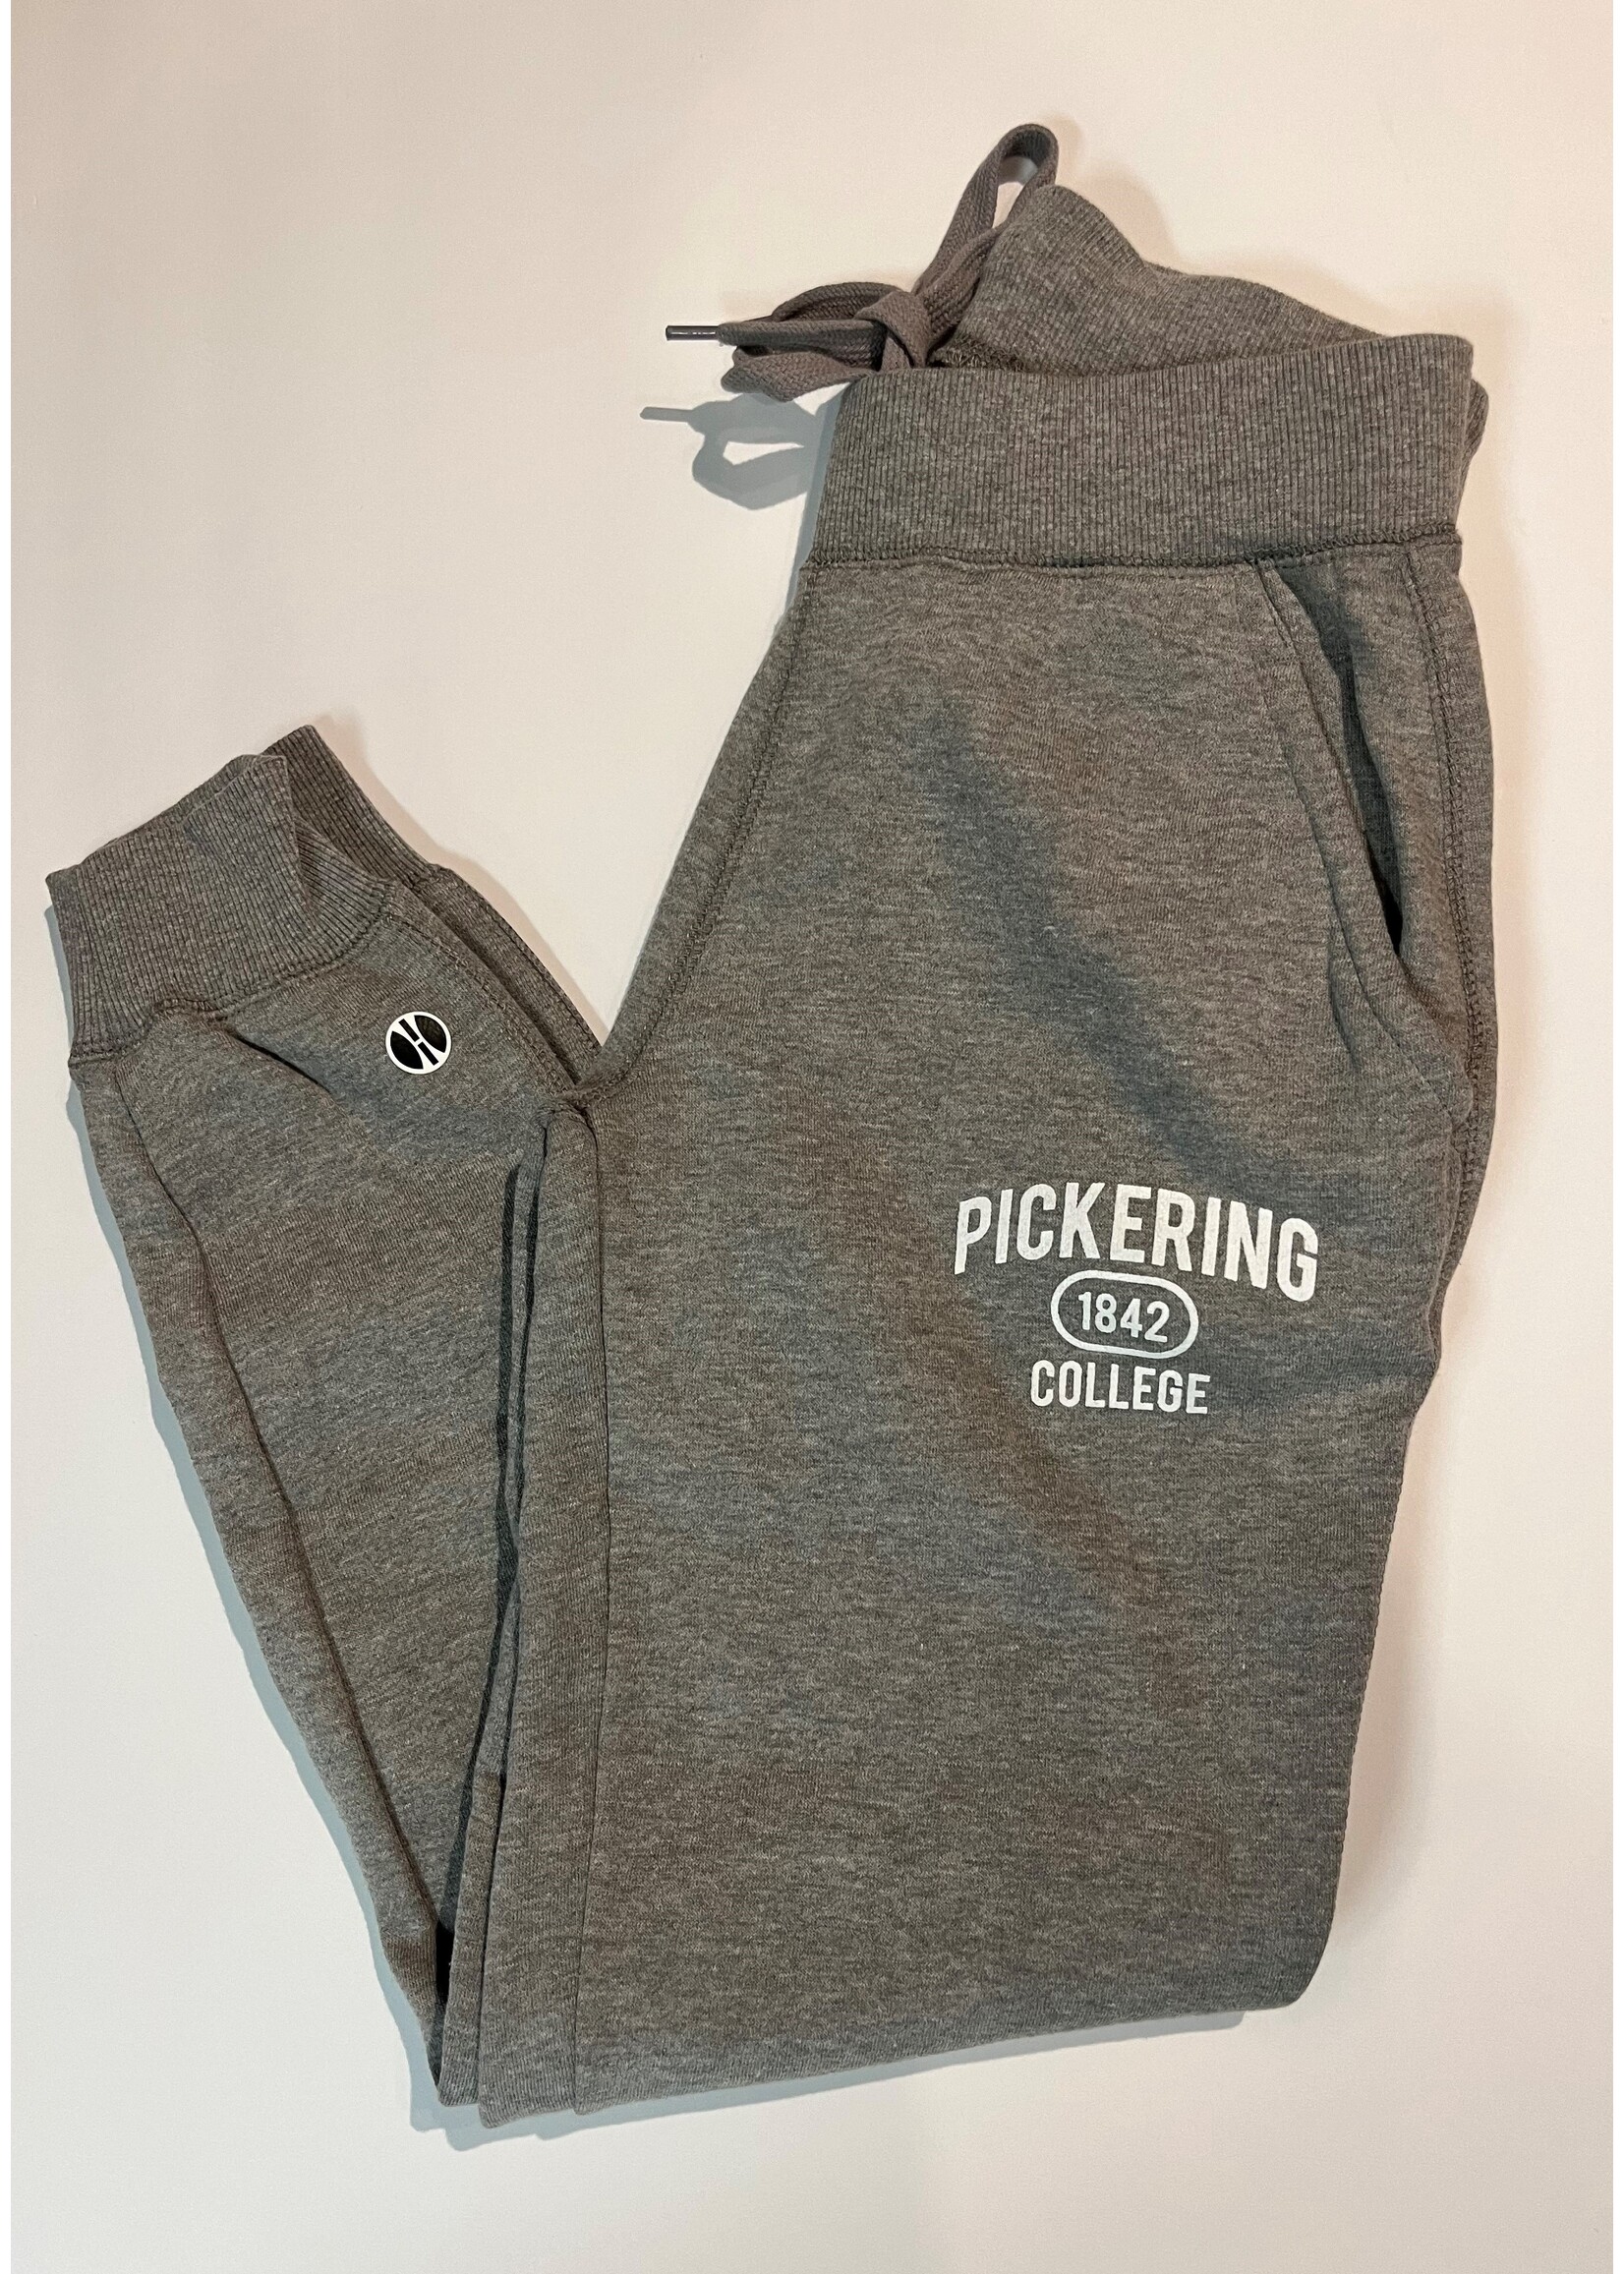 Deluxe Fleece Cuffed Sweatpant with pockets